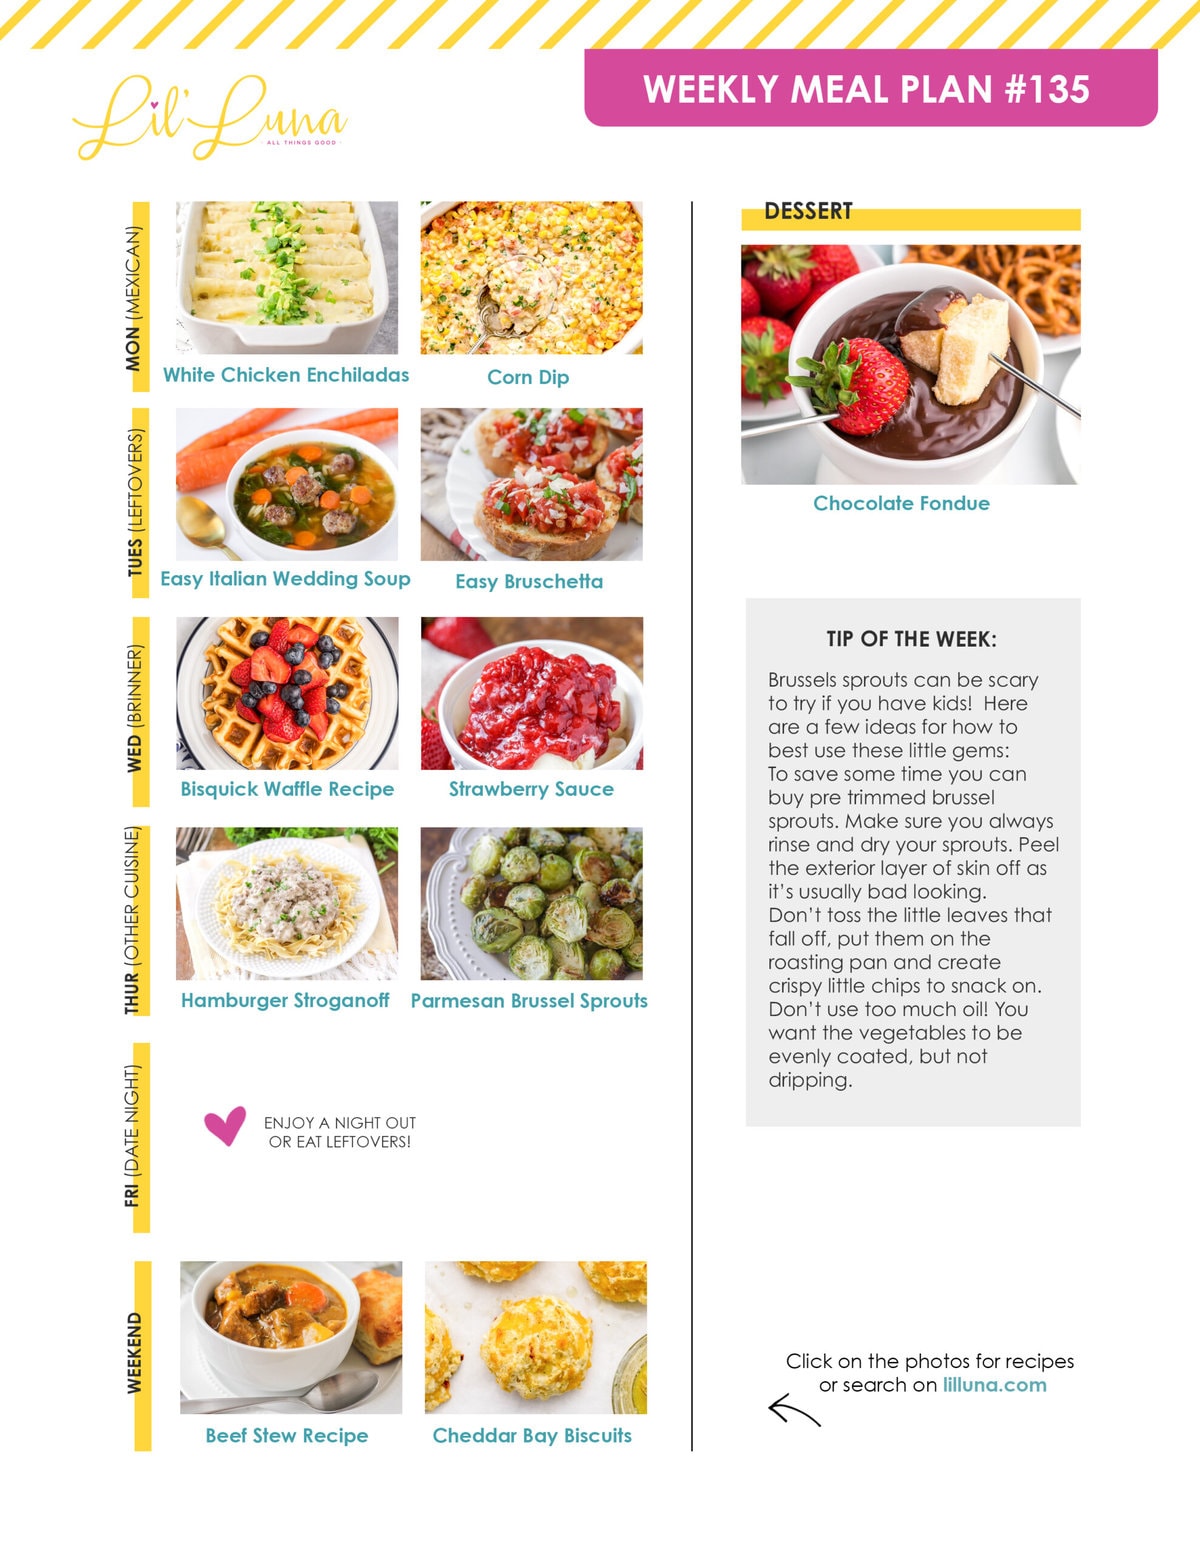 Meal plan 135 graphic.